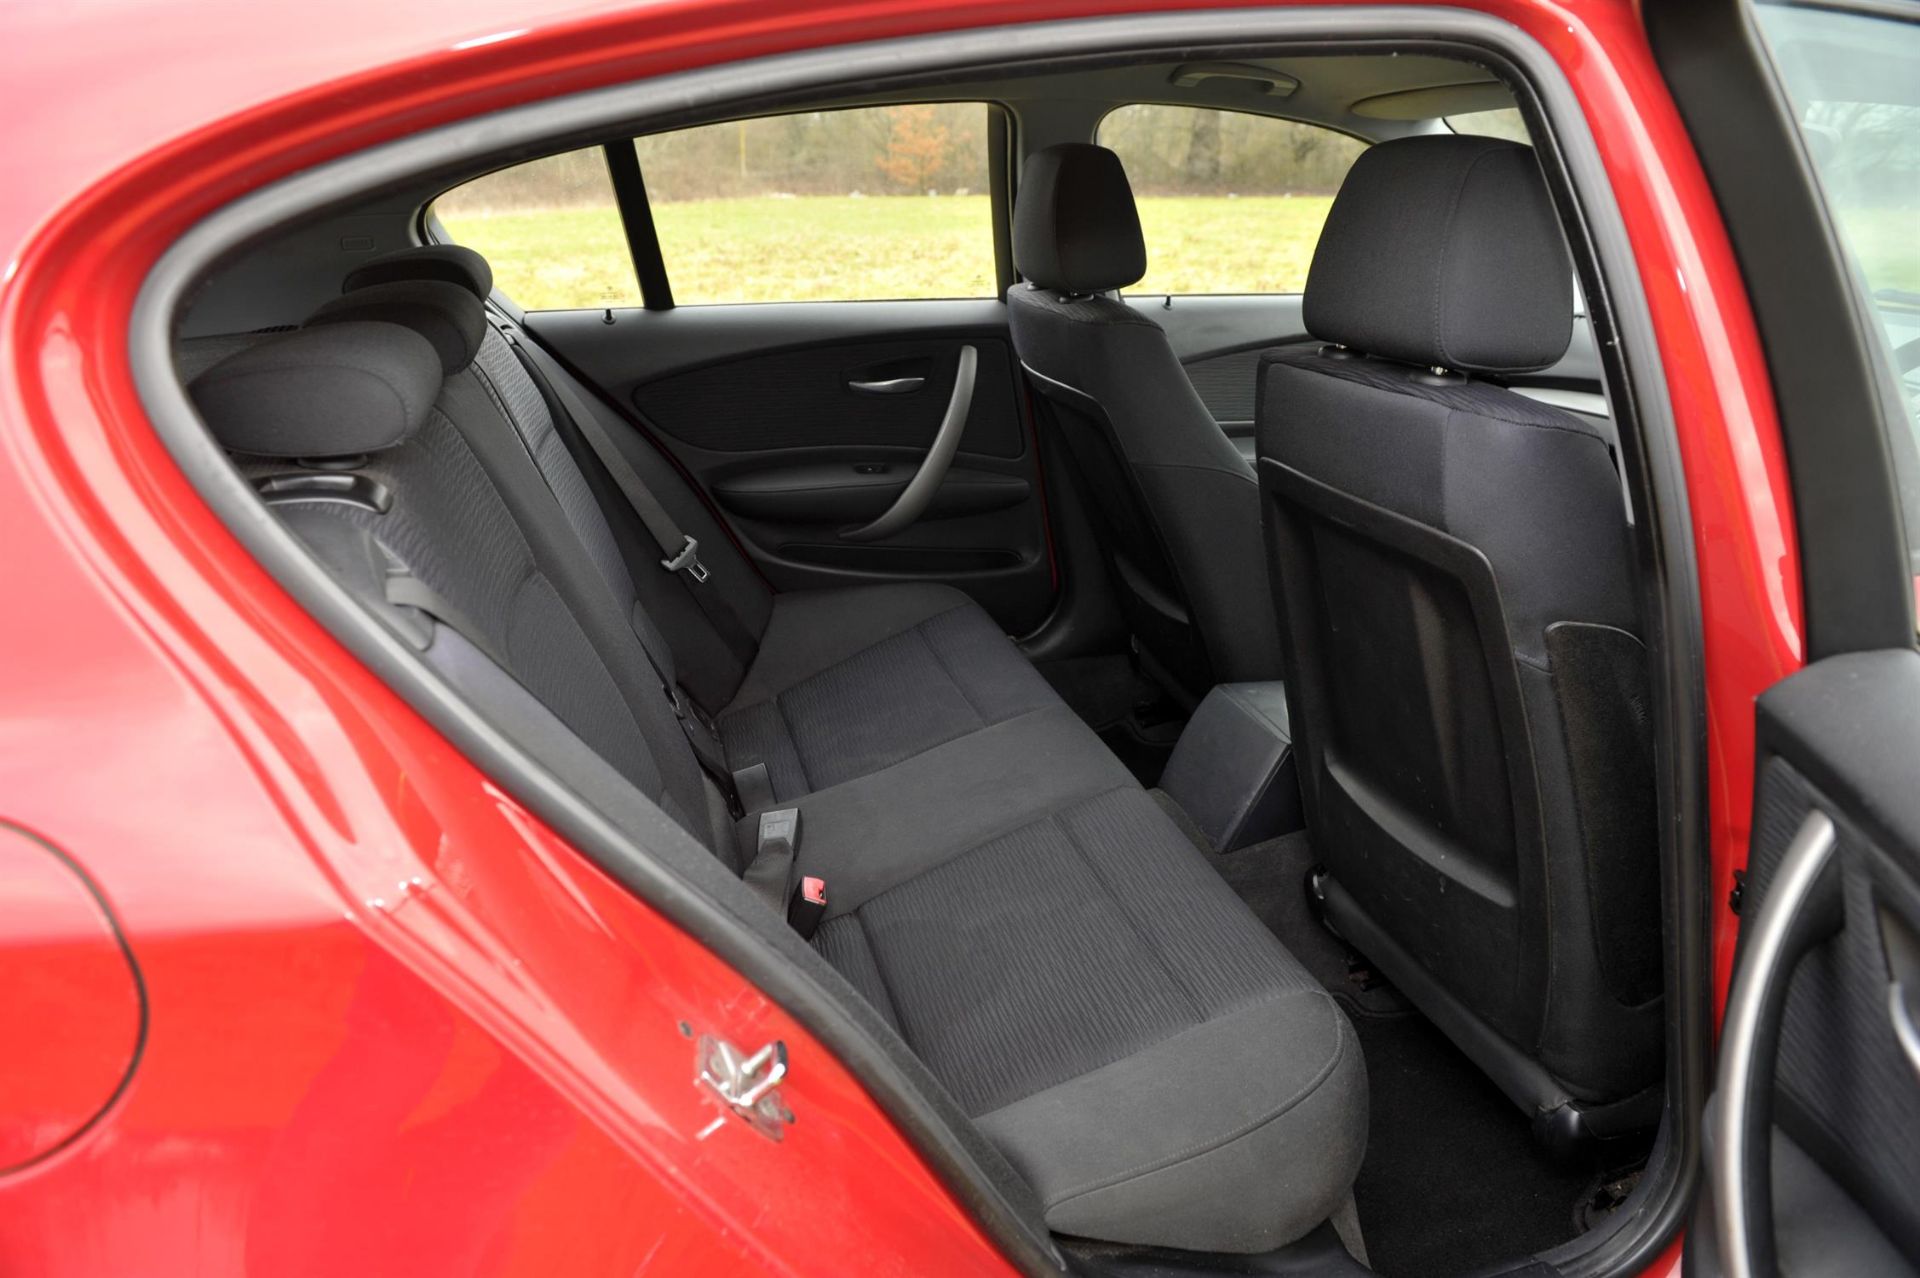 2007 BMW 116i 5 Door in red. Registration number LD57 WNZ - Economical and benefiting from the - Image 6 of 14